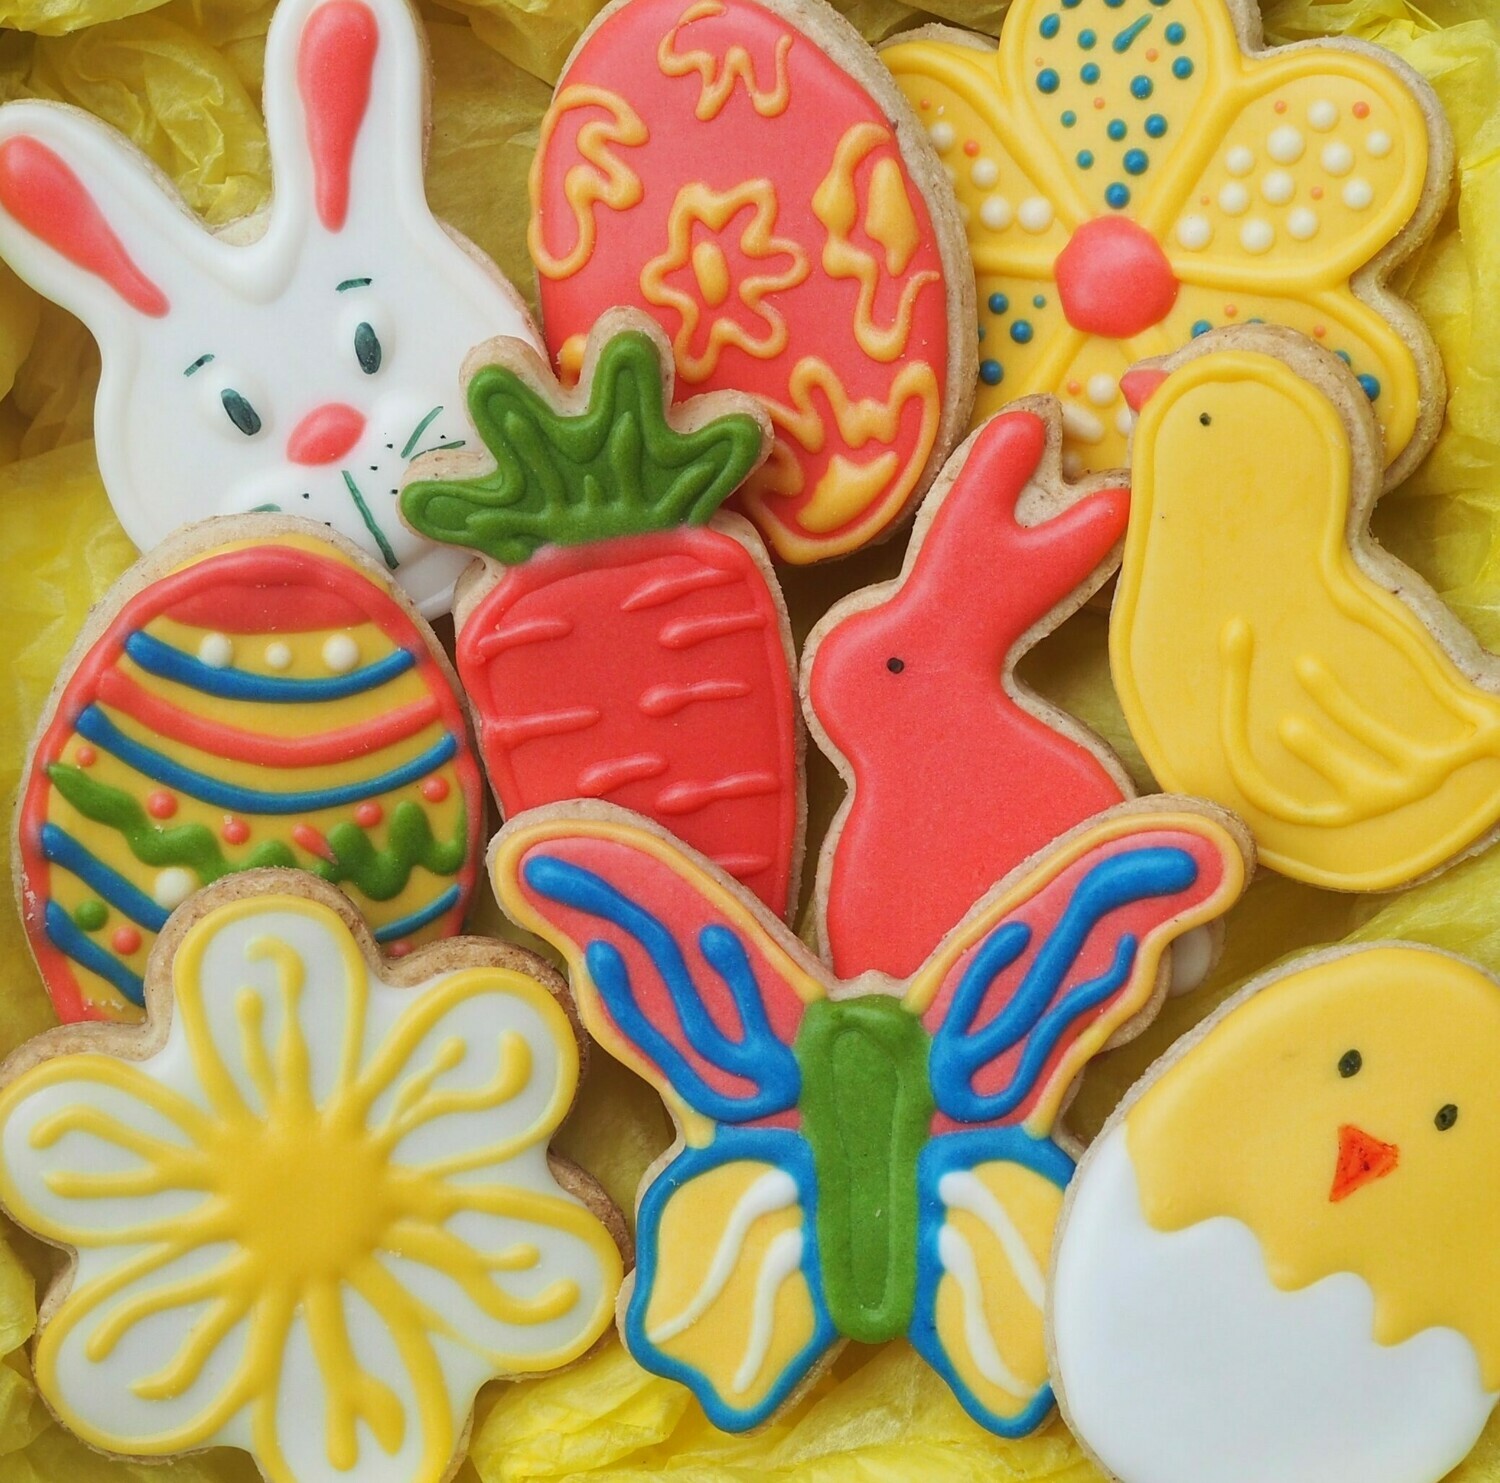 Vegan decorated Easter sugar cookies.GLUTEN FREE available.